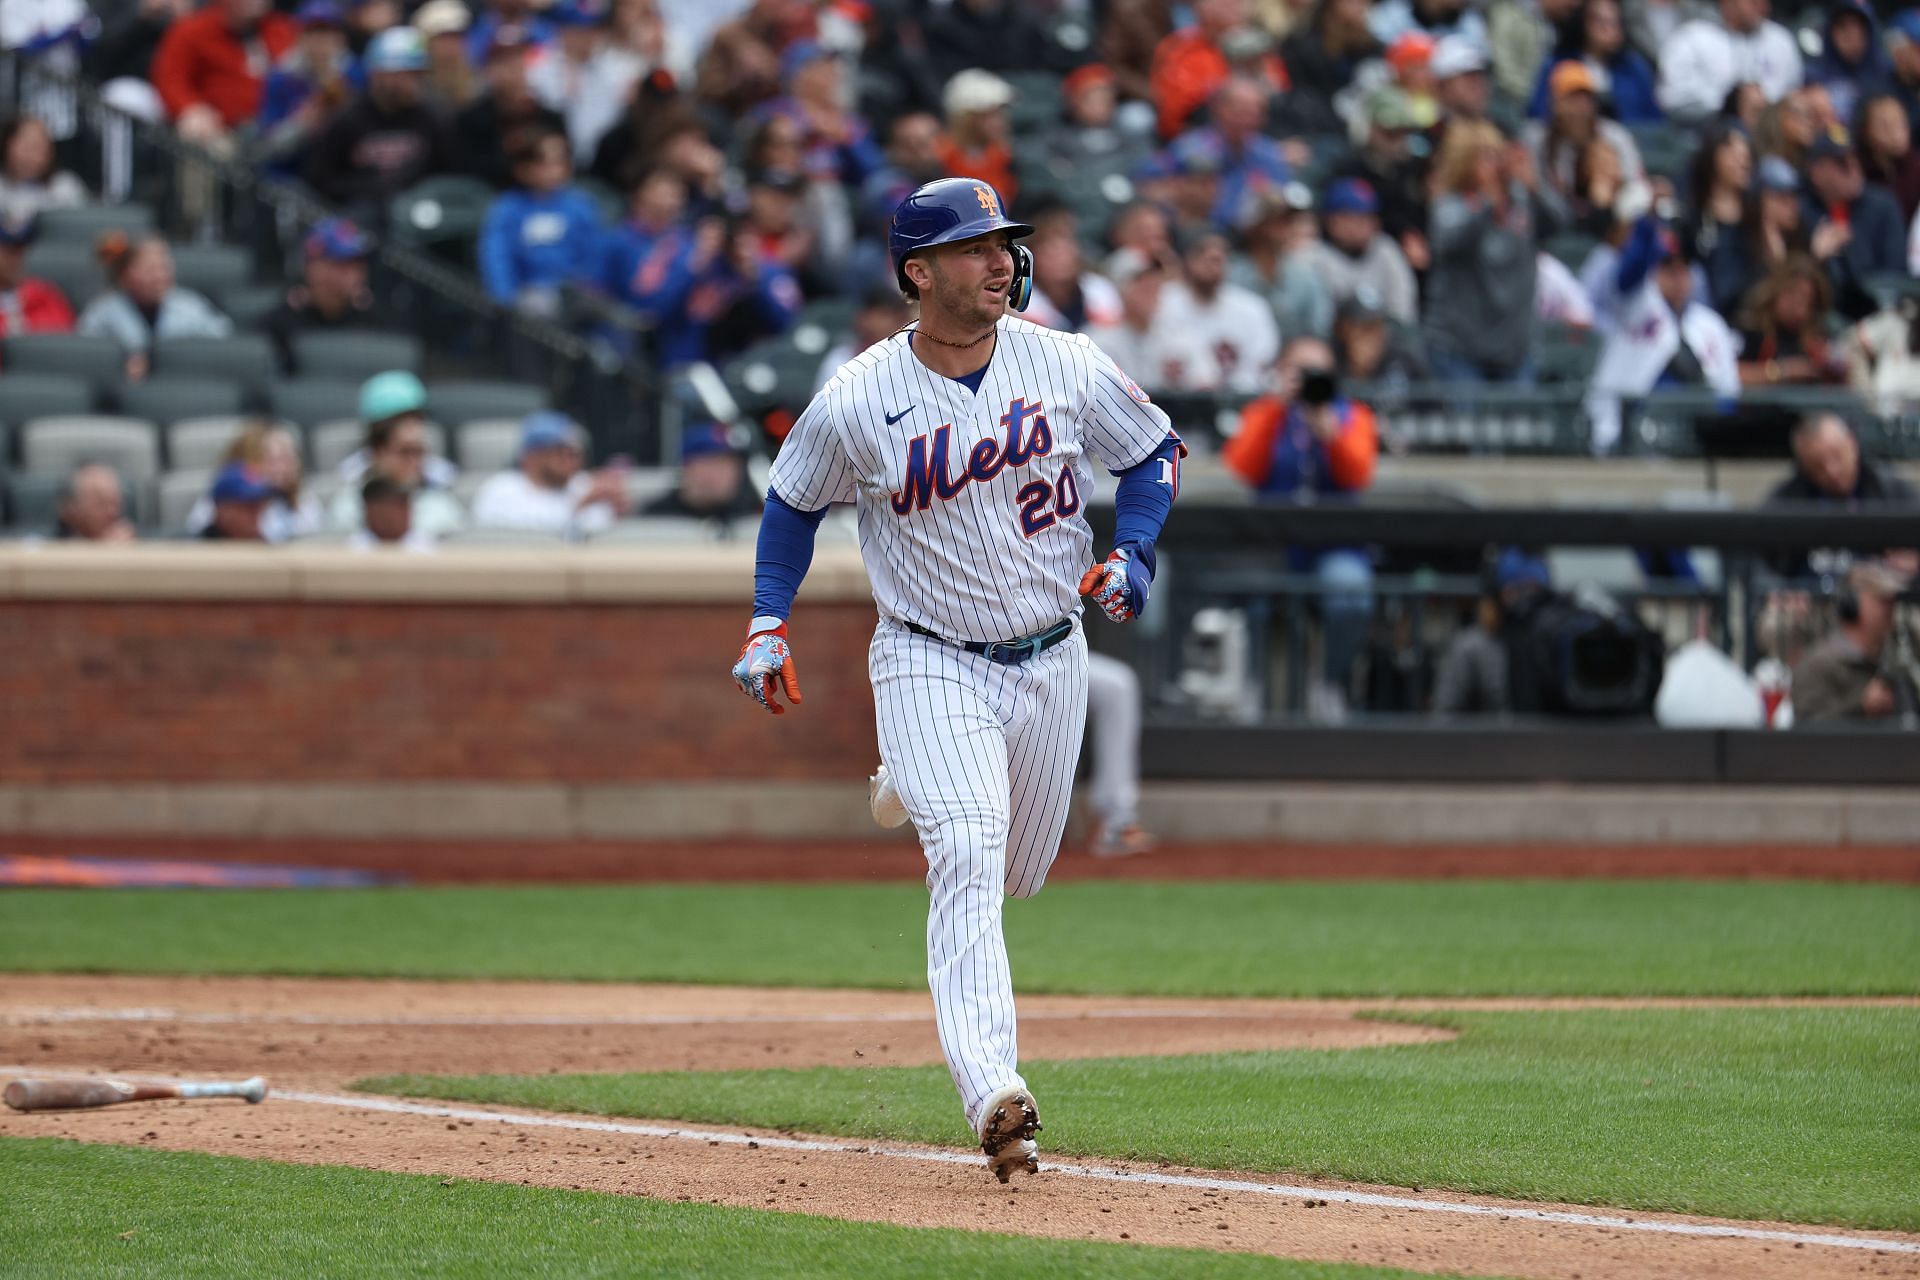 New York Mets slugger Pete Alonso is batting .260 with 16 RBIs